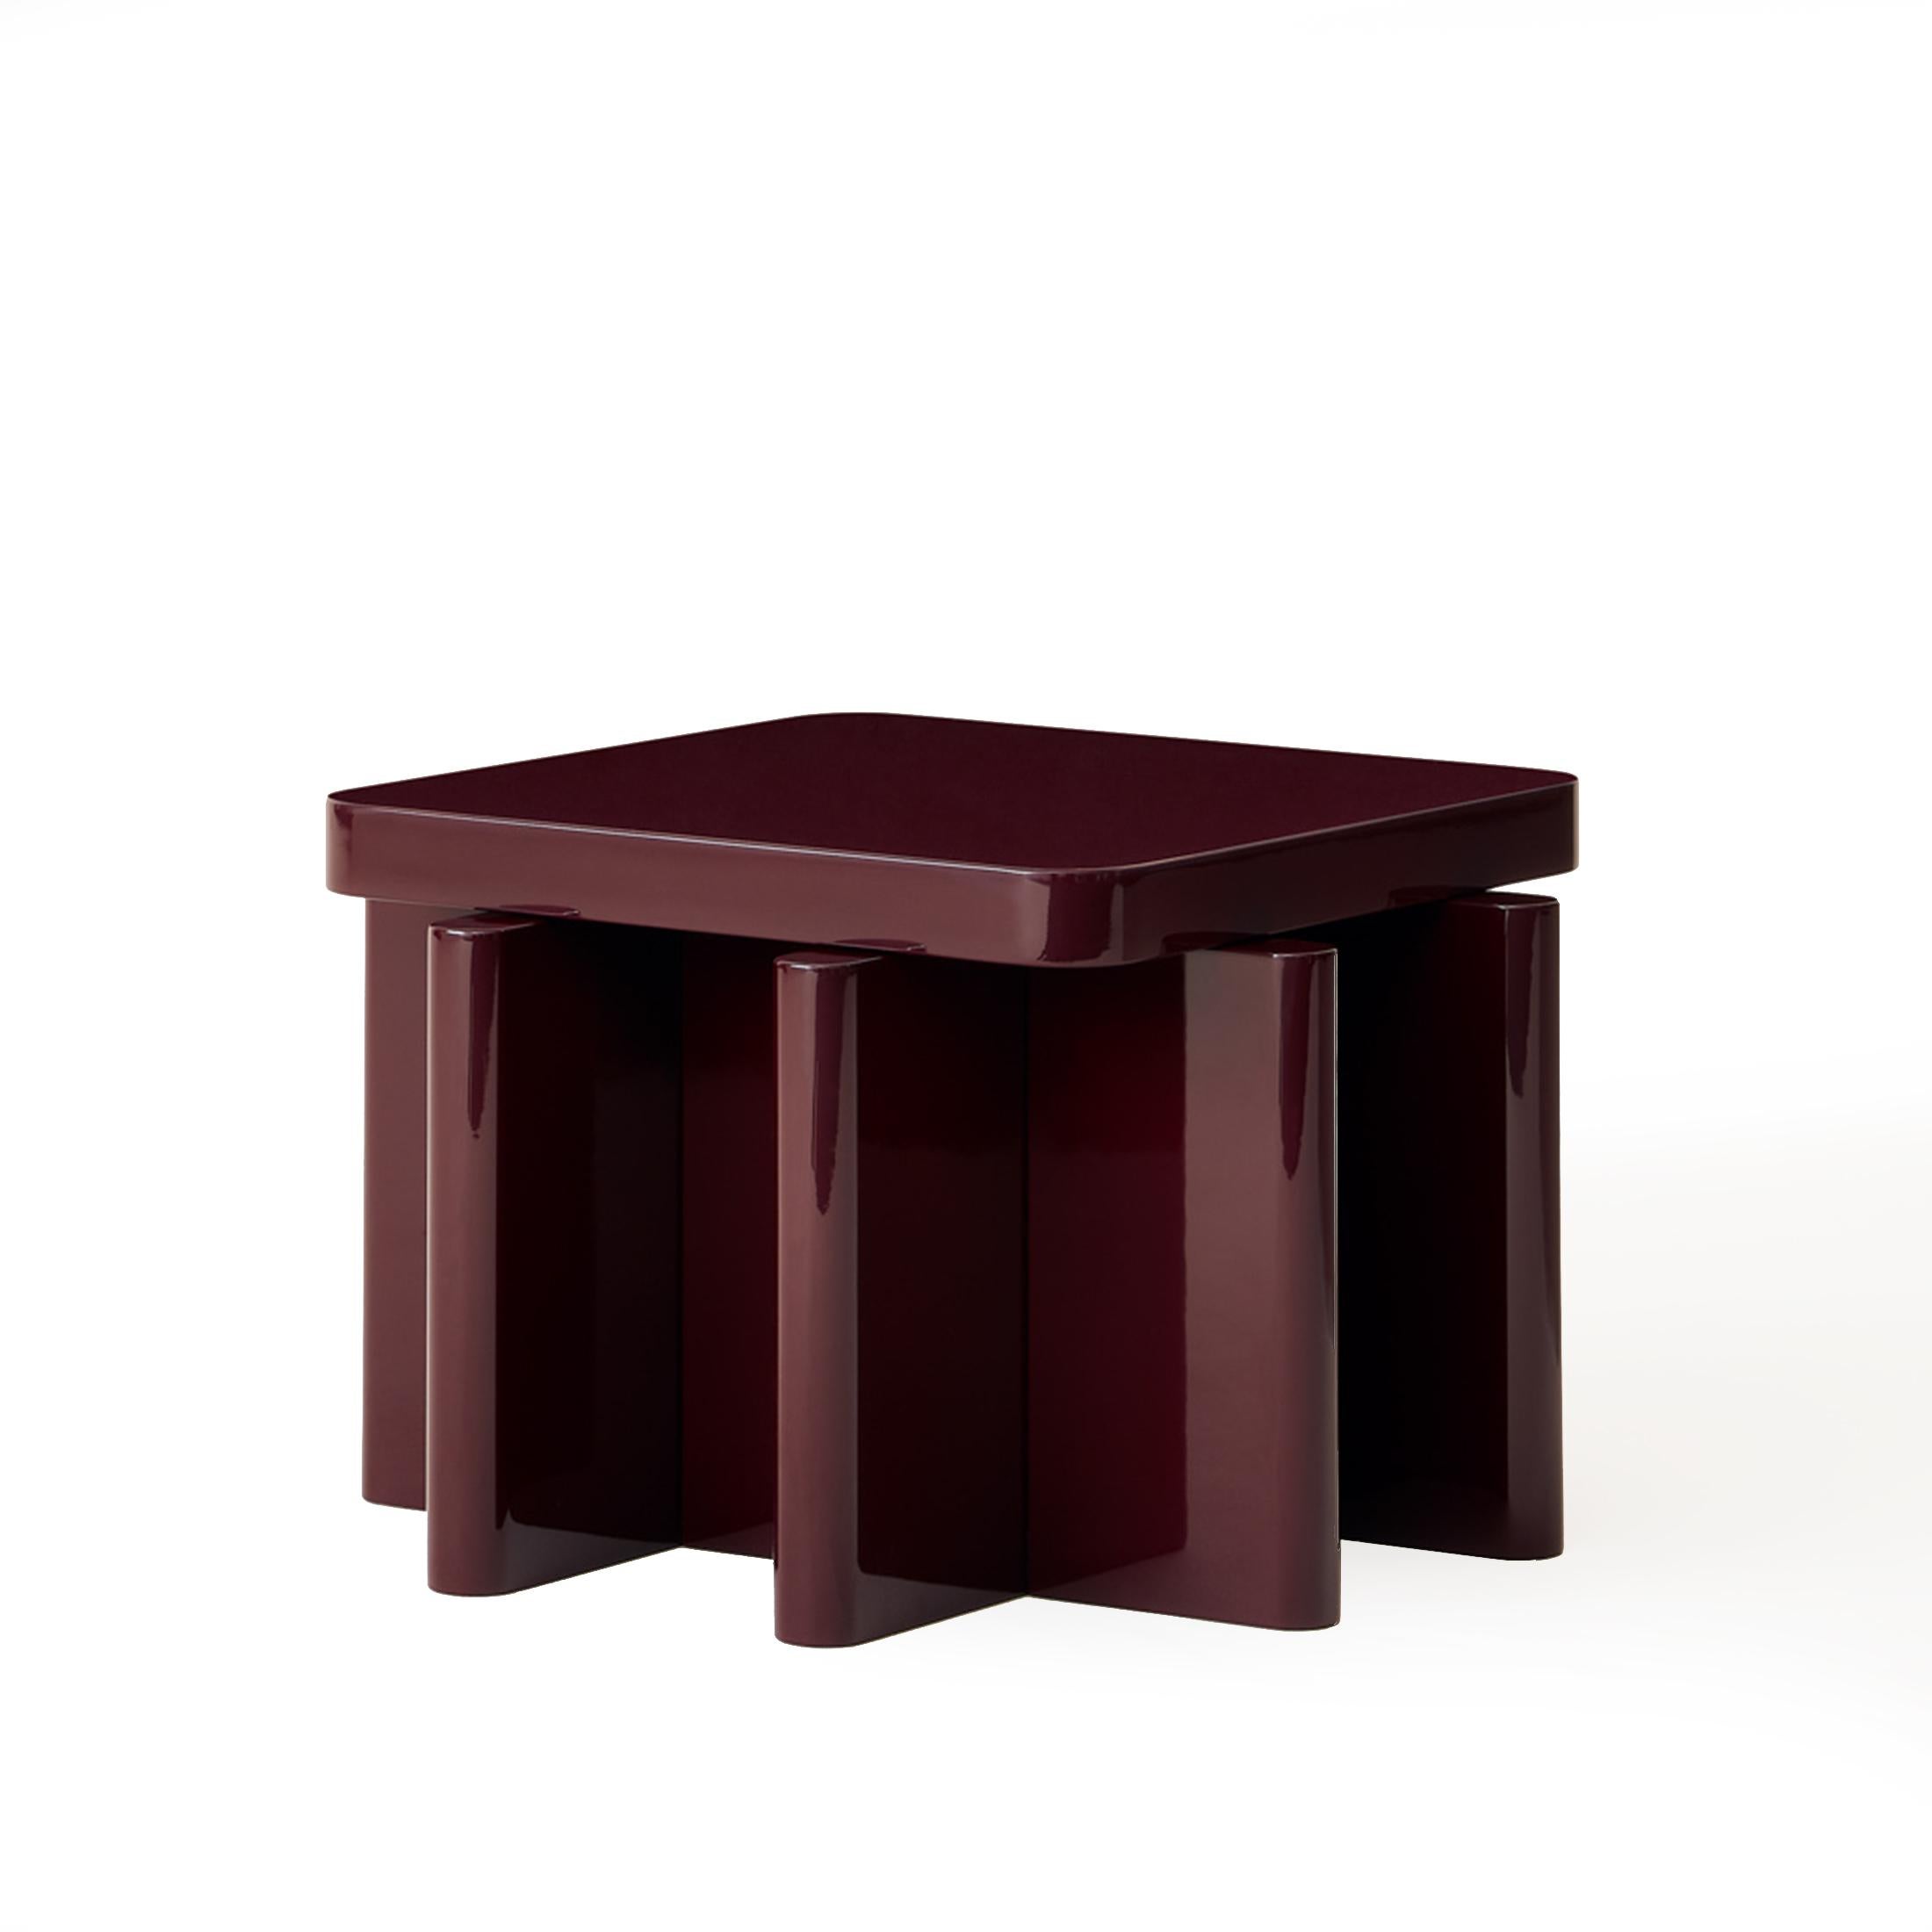 Lacquer Spina Table in Lac Wood Bordeaux 2+2 Edit by Portego For Sale